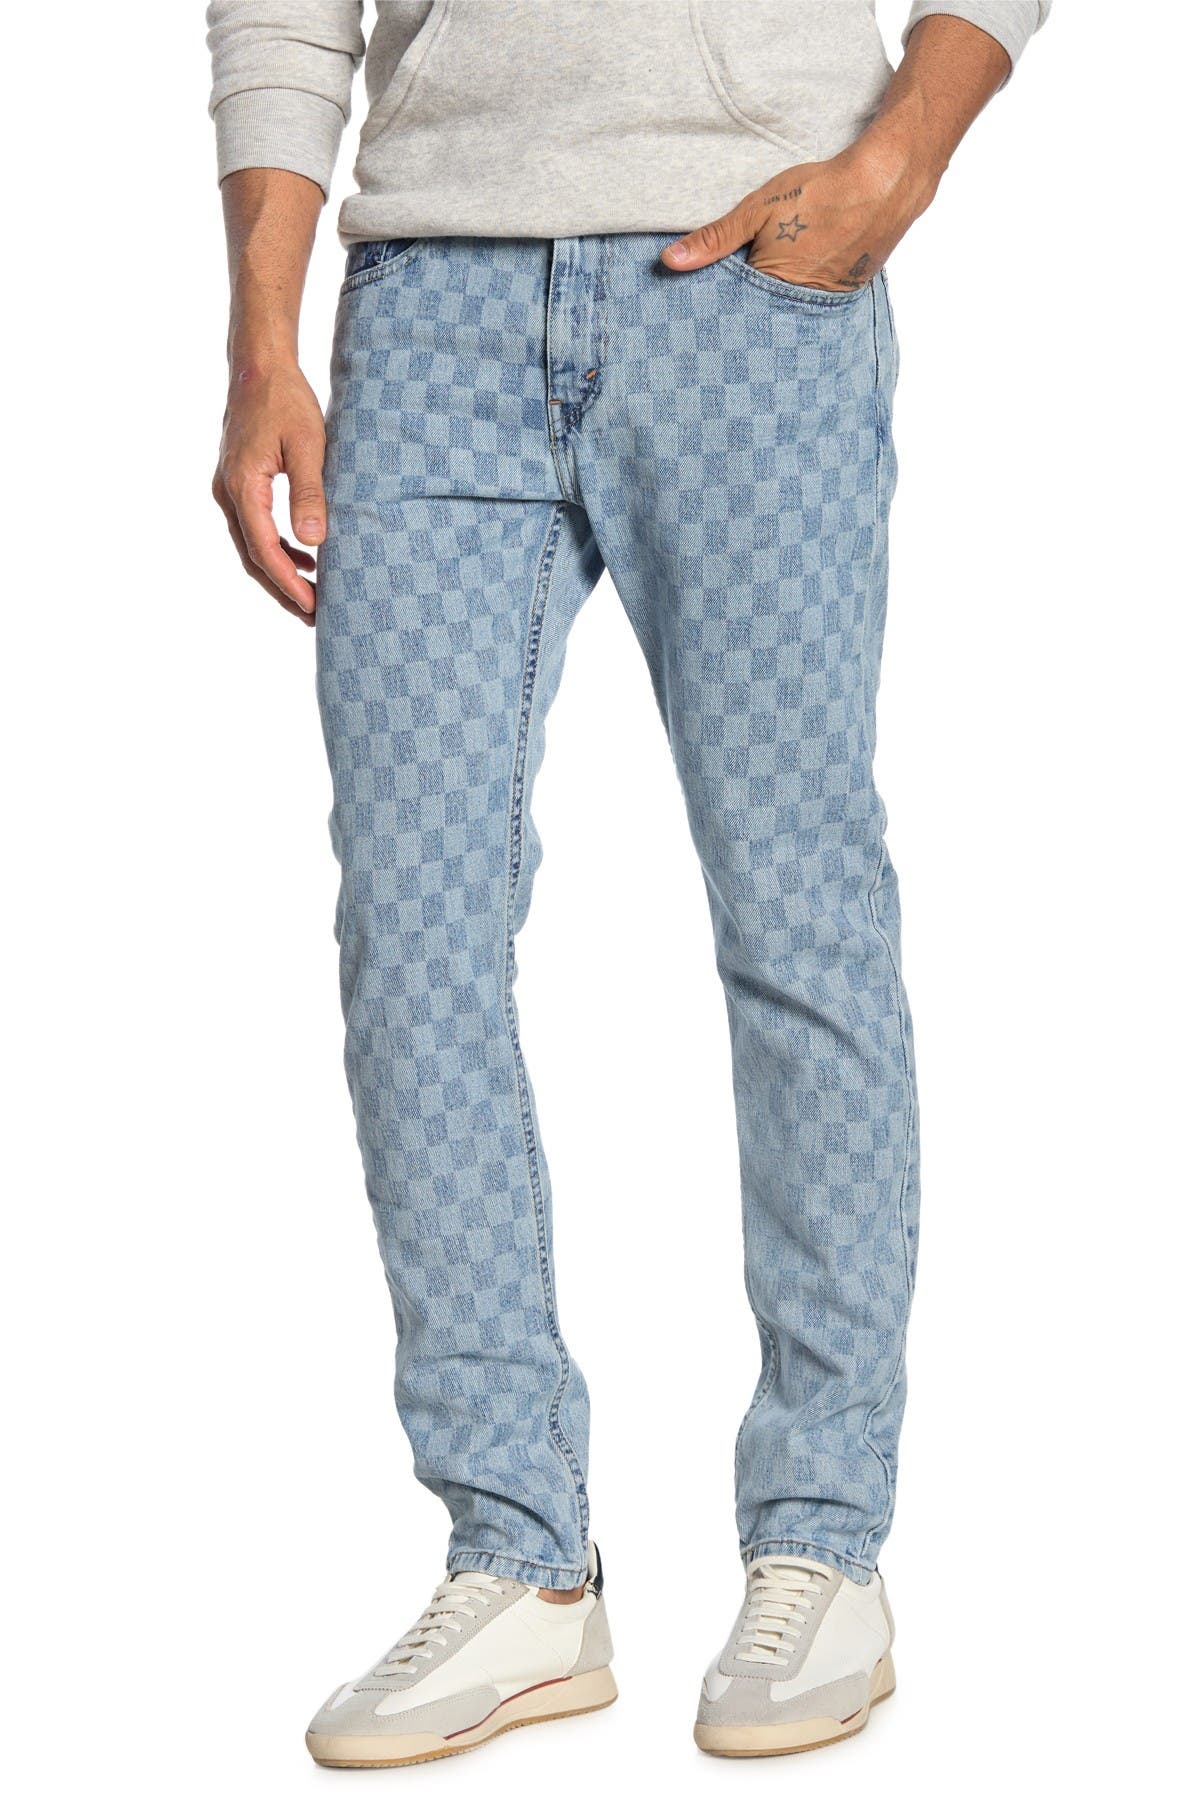 Levi's | 512 Slim Fit Checkered Jeans 